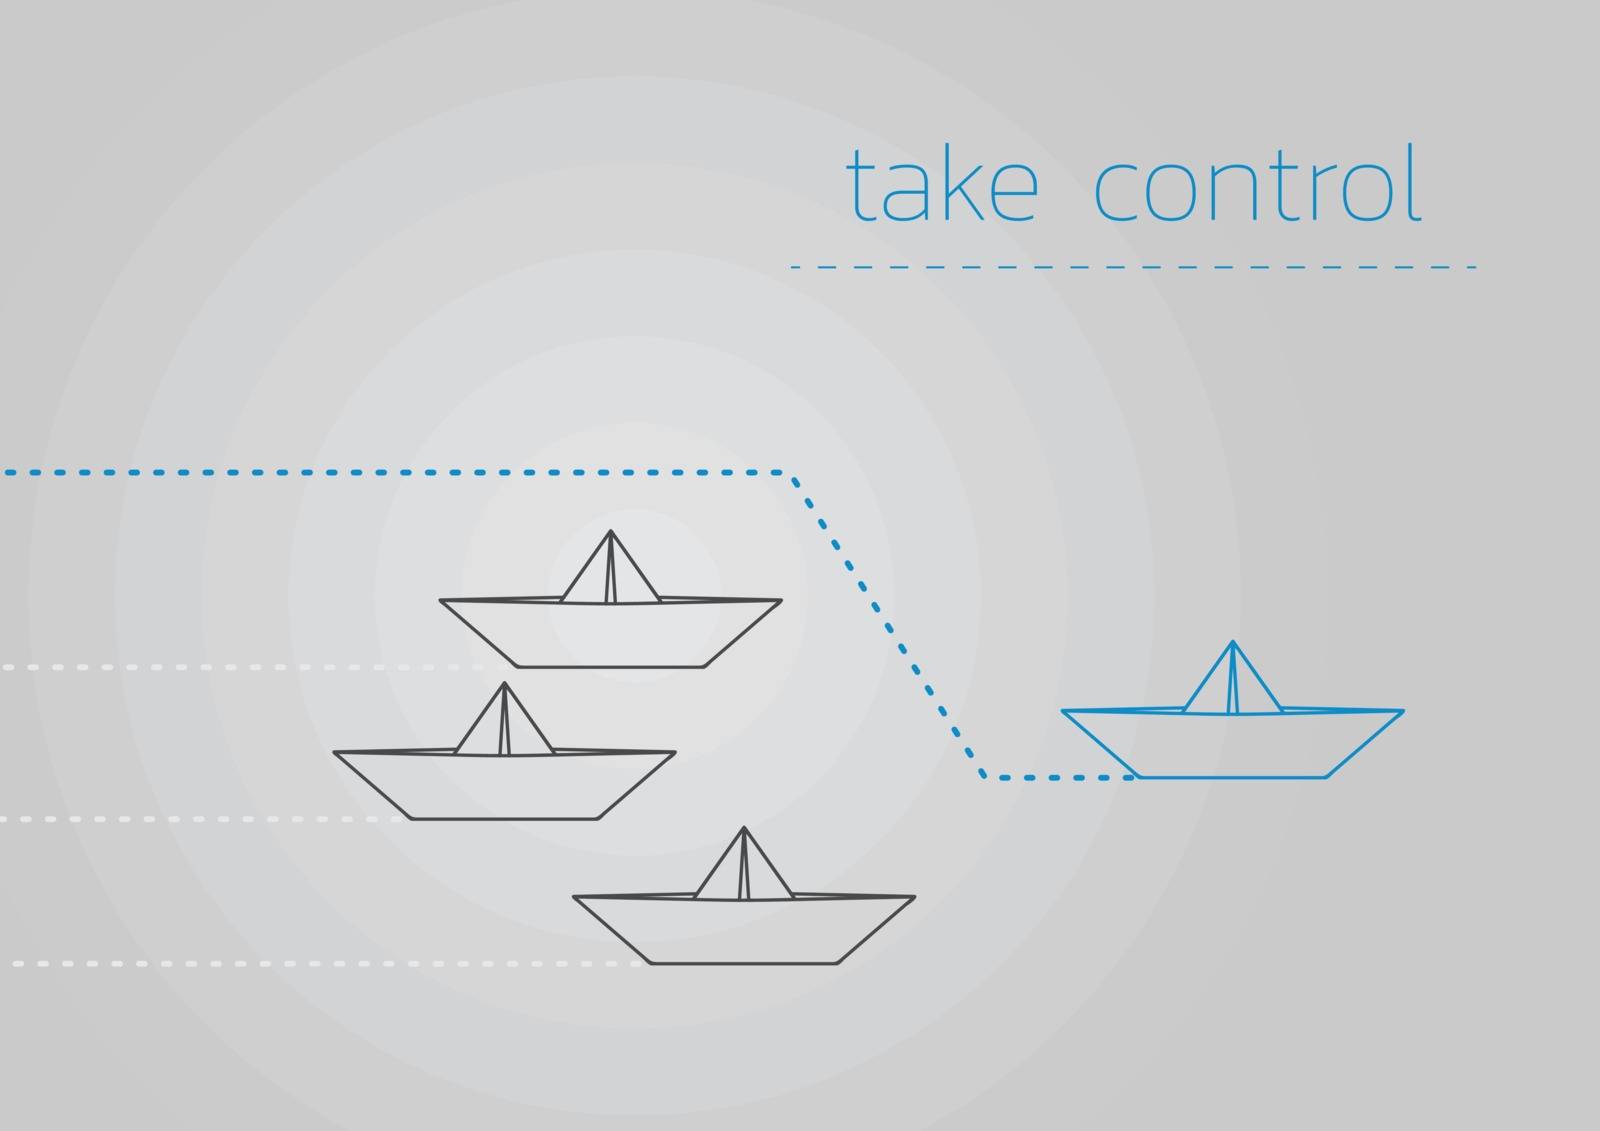 Take control concept illustration with a folded paper boat.